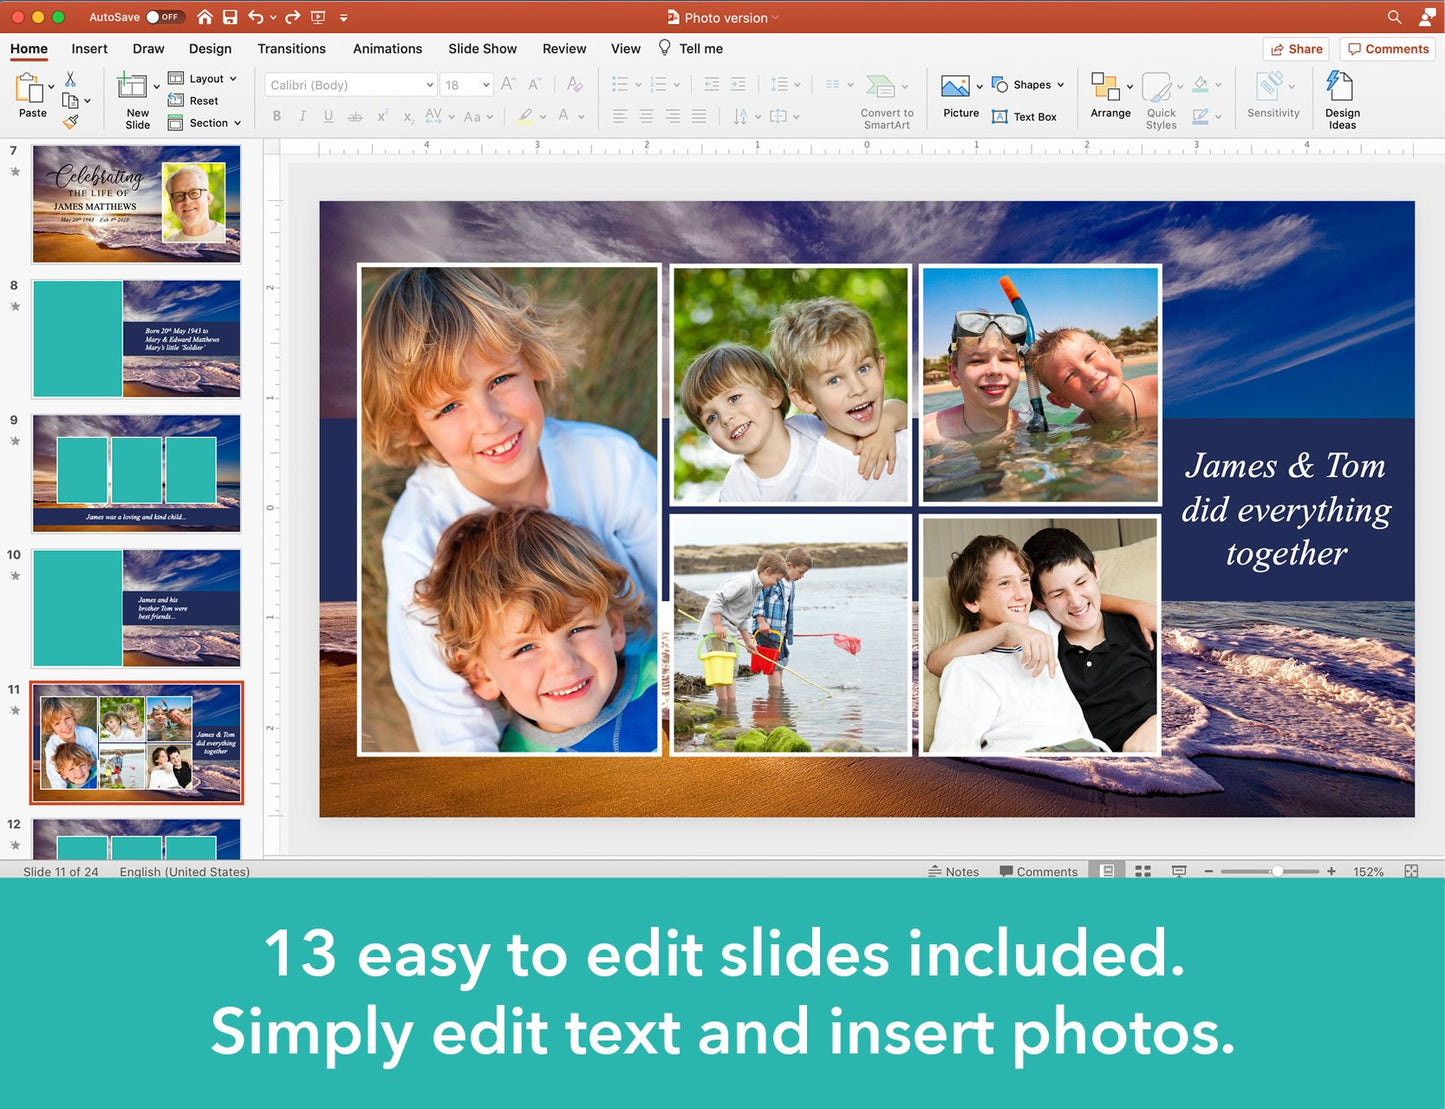 Waves Funeral Slide Show Template